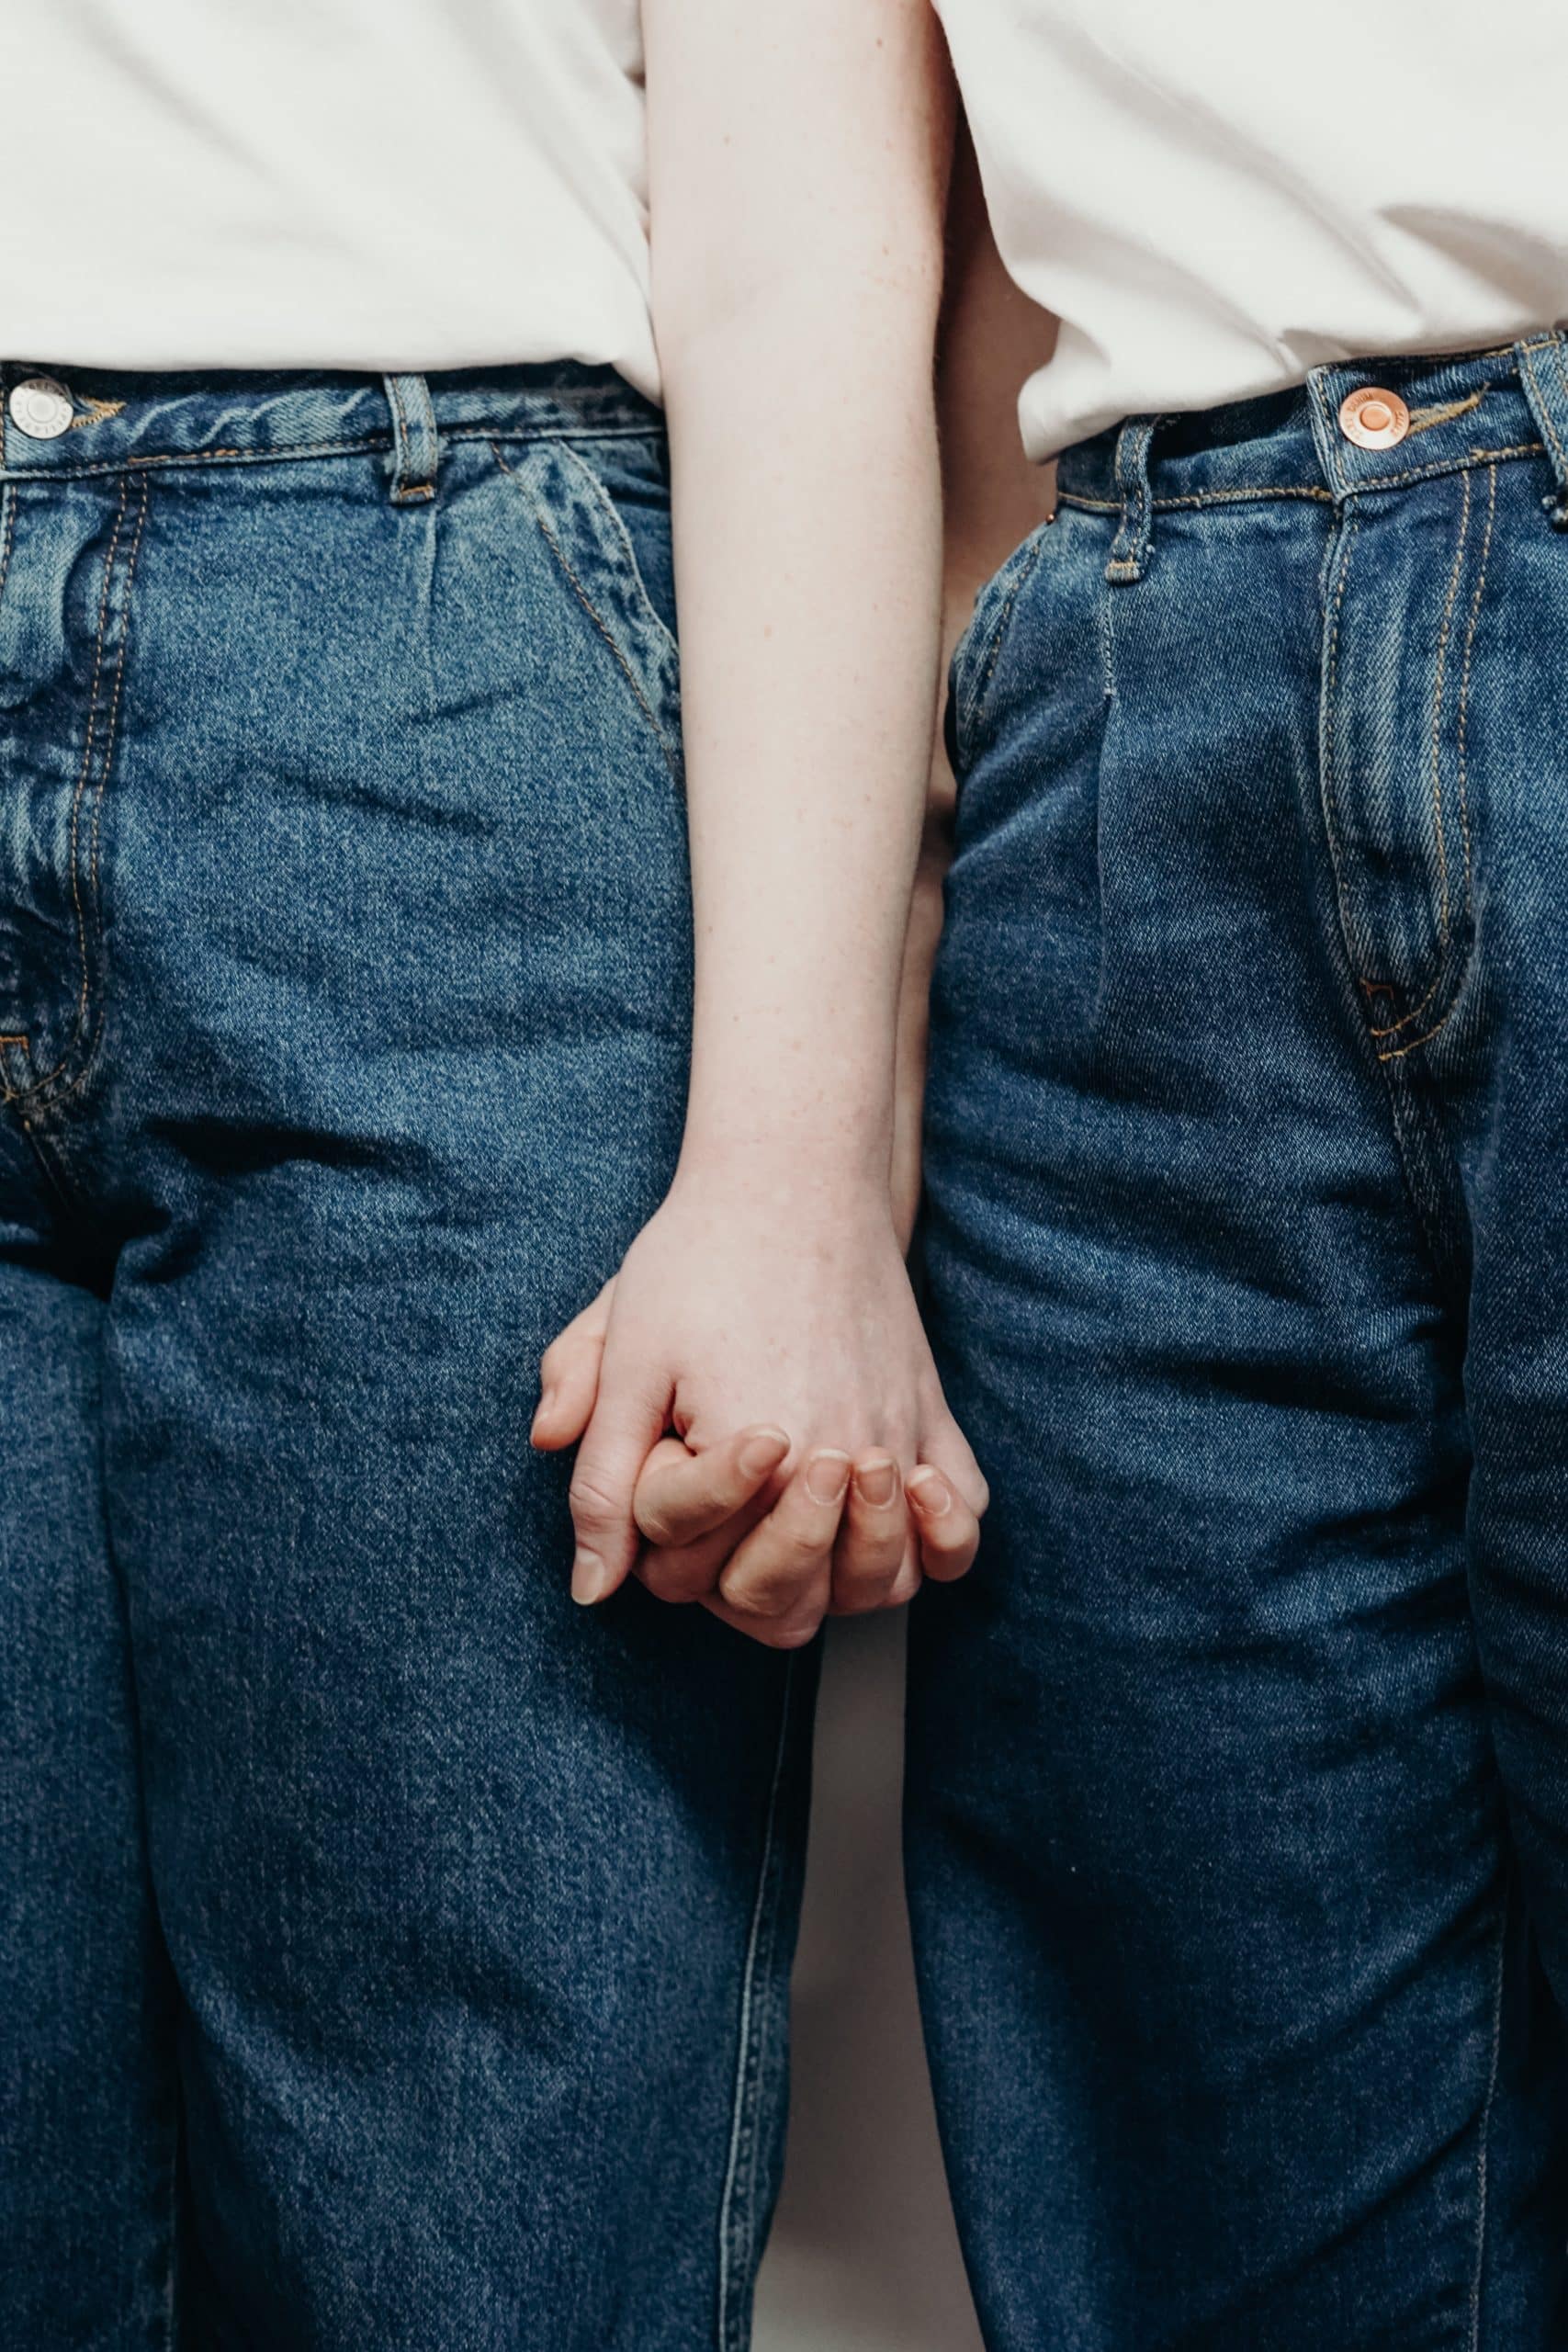 Couple holding hands. Image for the podcast episode "Can data find me a date?"